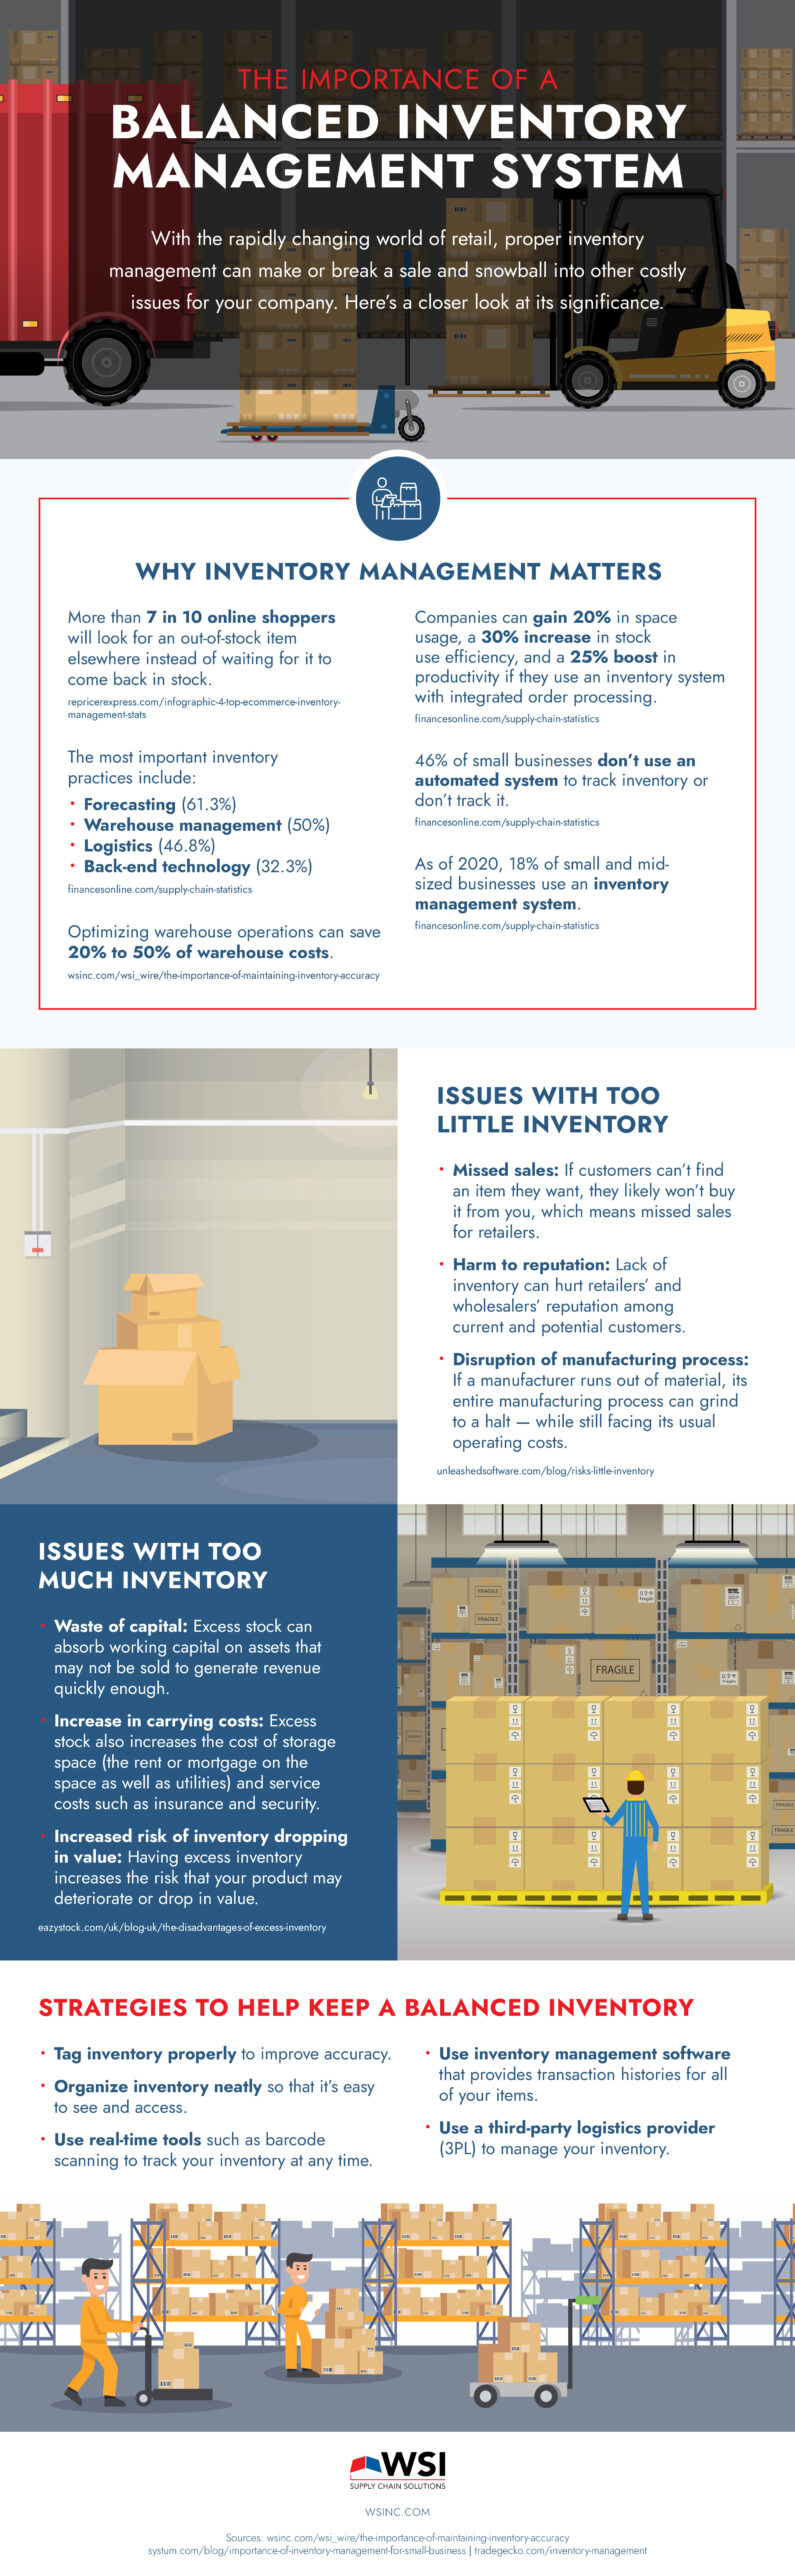 The Importance of a balanced Inventory Management System - Infographic